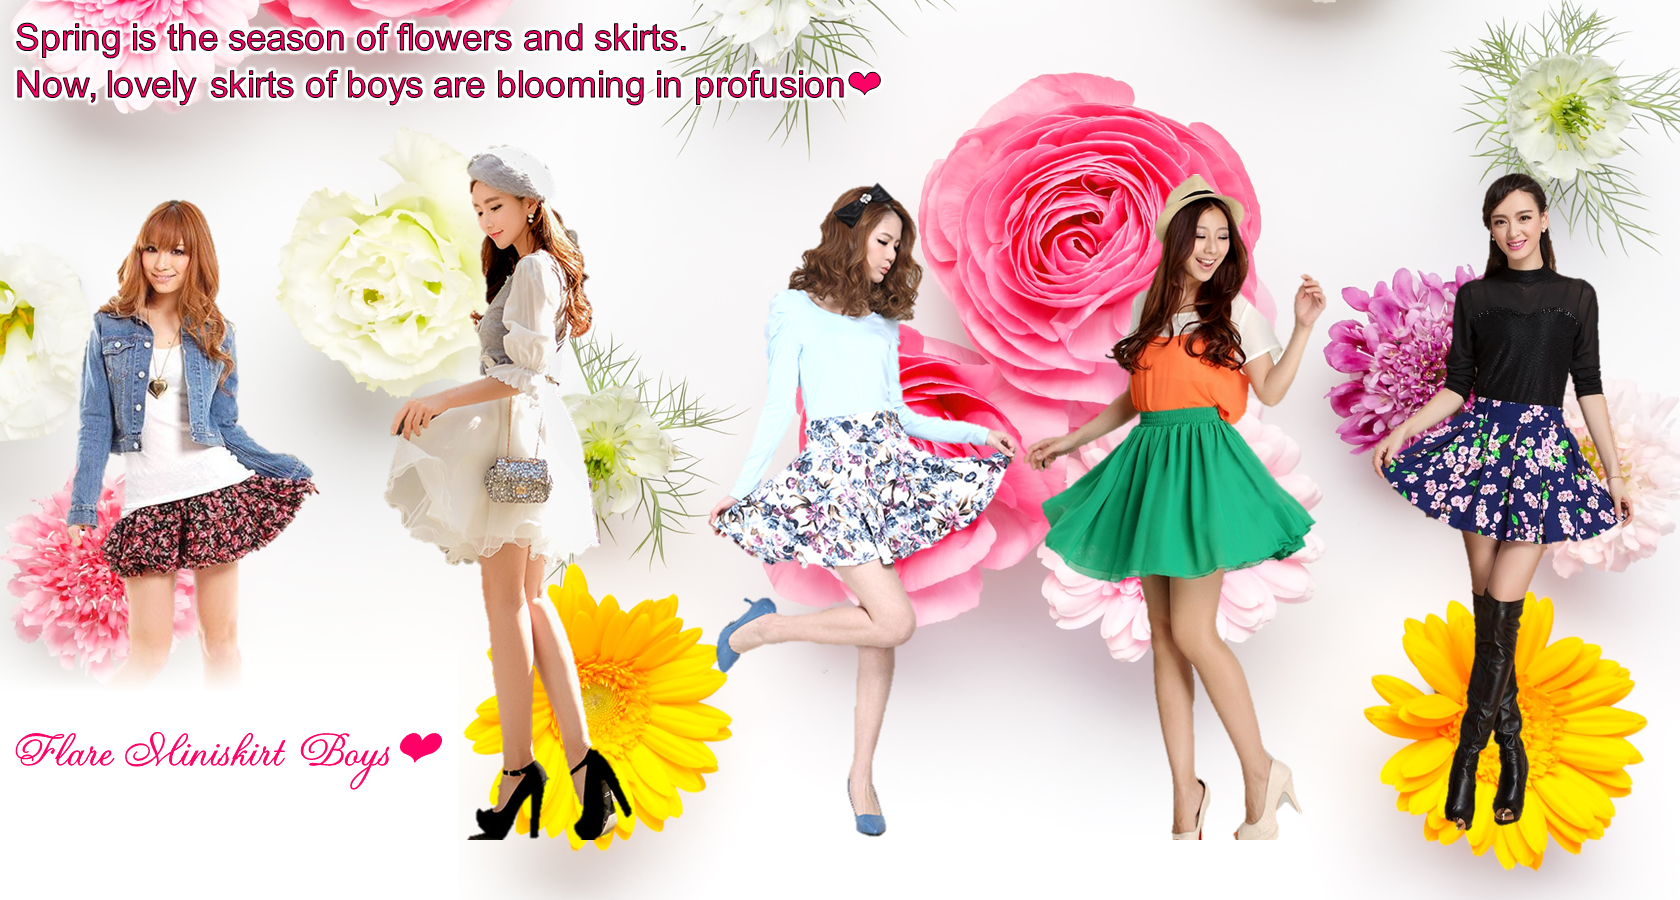 Spring is the season of flowers and skirts E